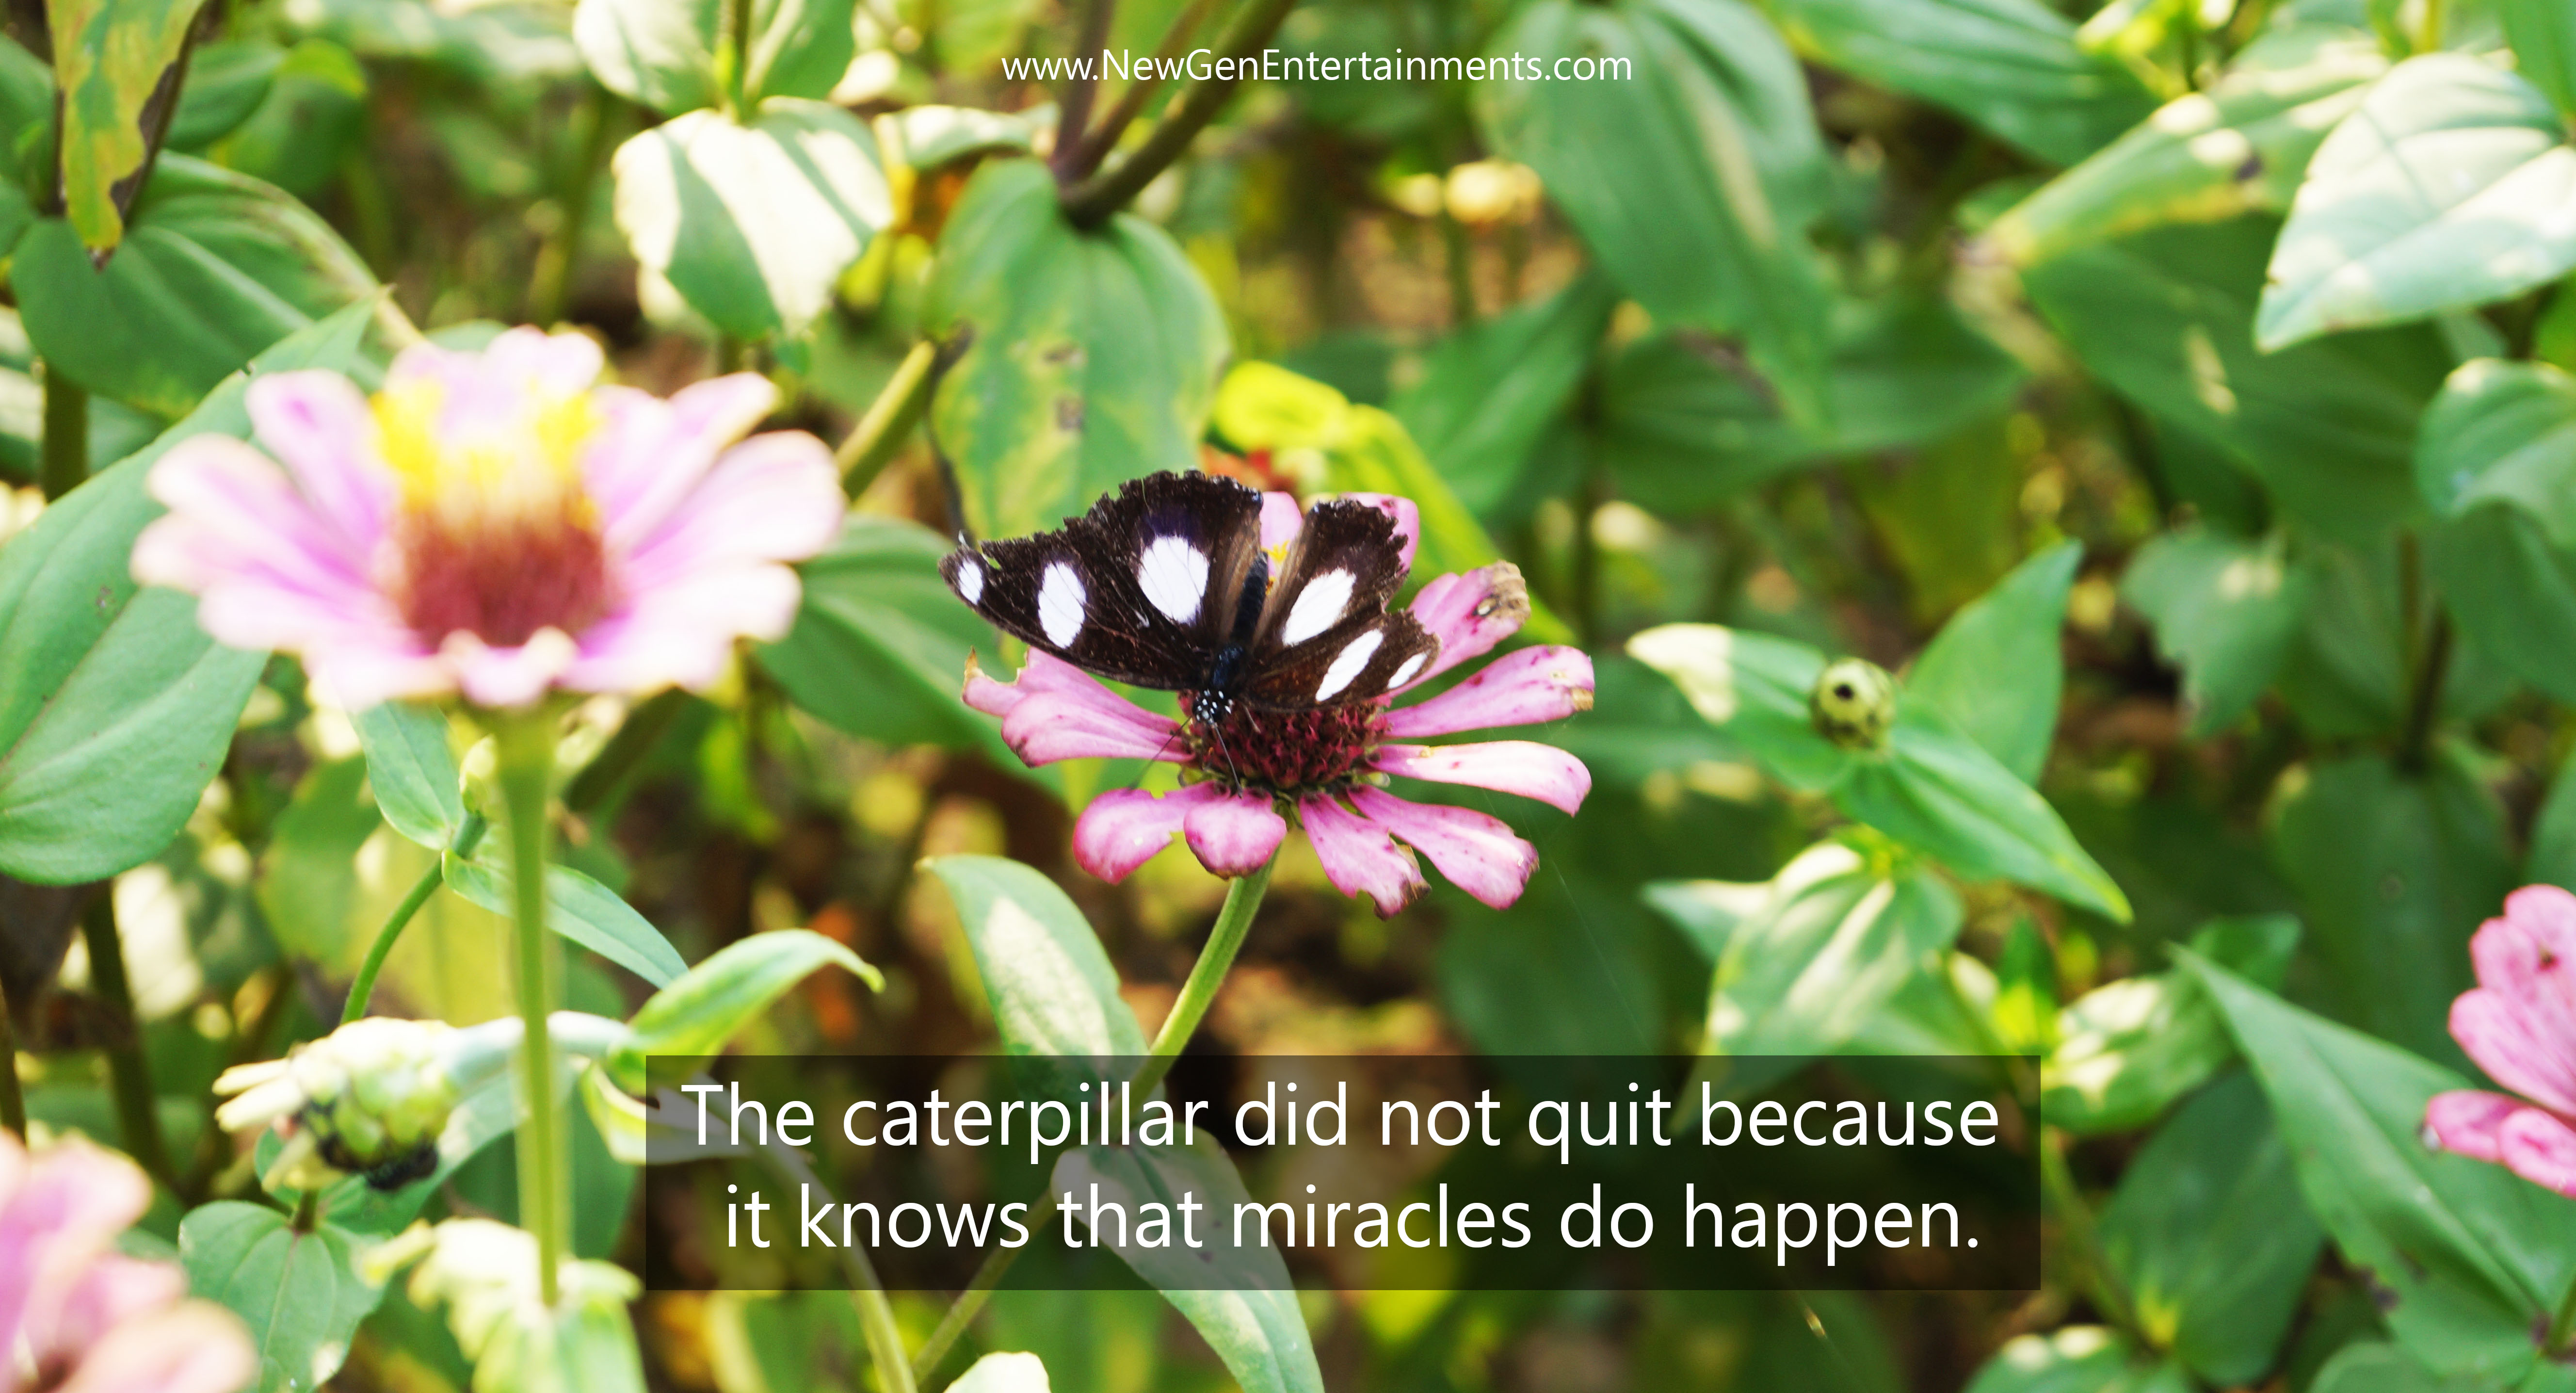 The caterpillar did not quit because it knows that miracles do happen